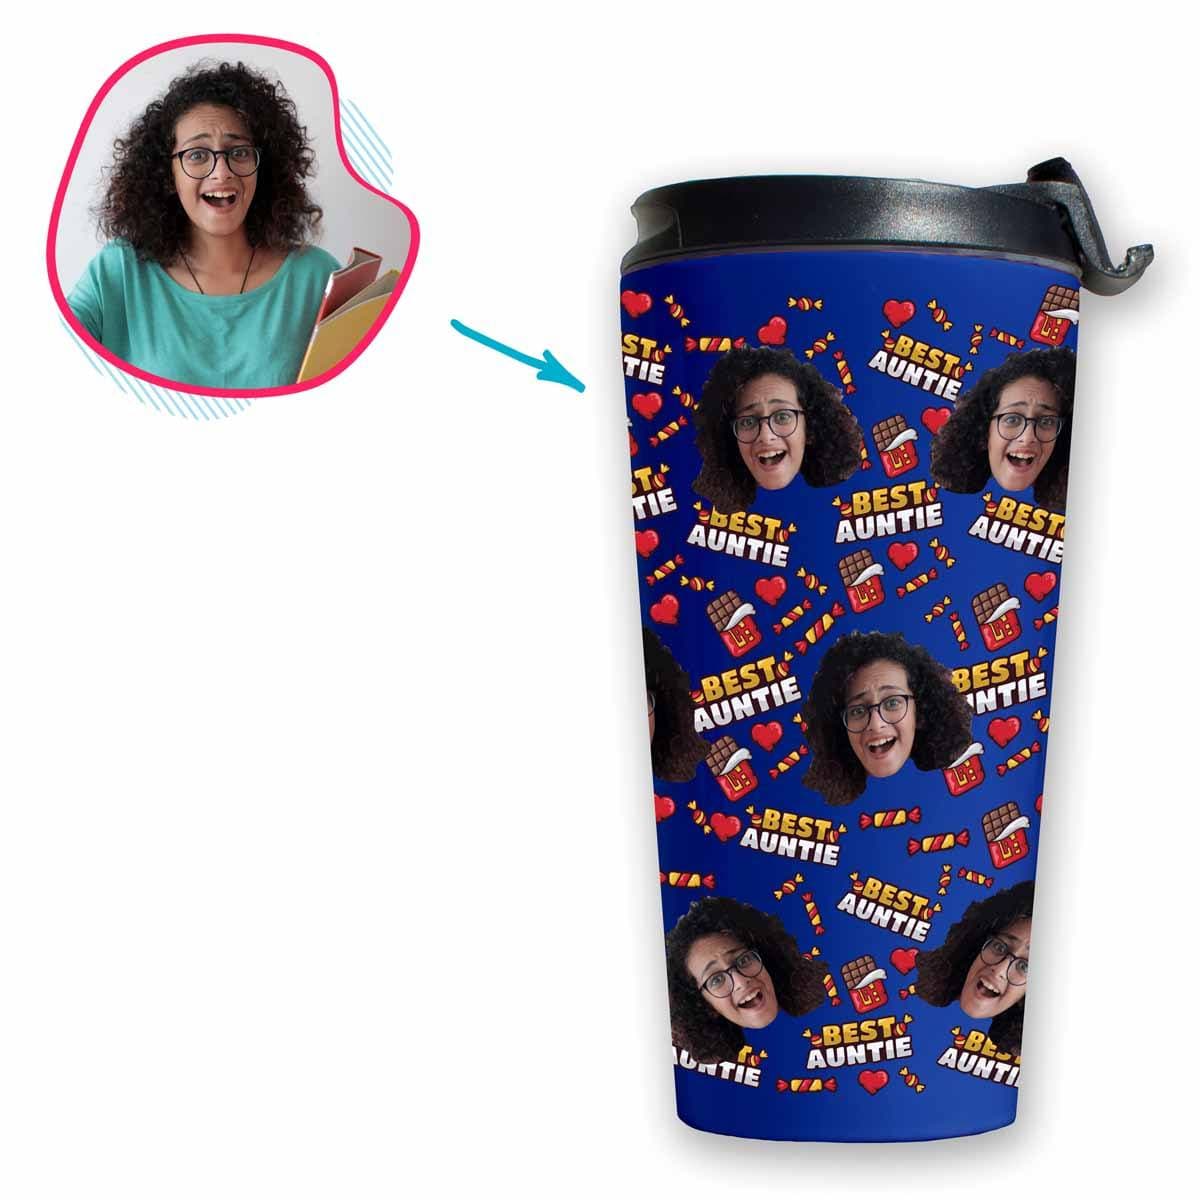 Darkblue Auntie personalized travel mug with photo of face printed on it